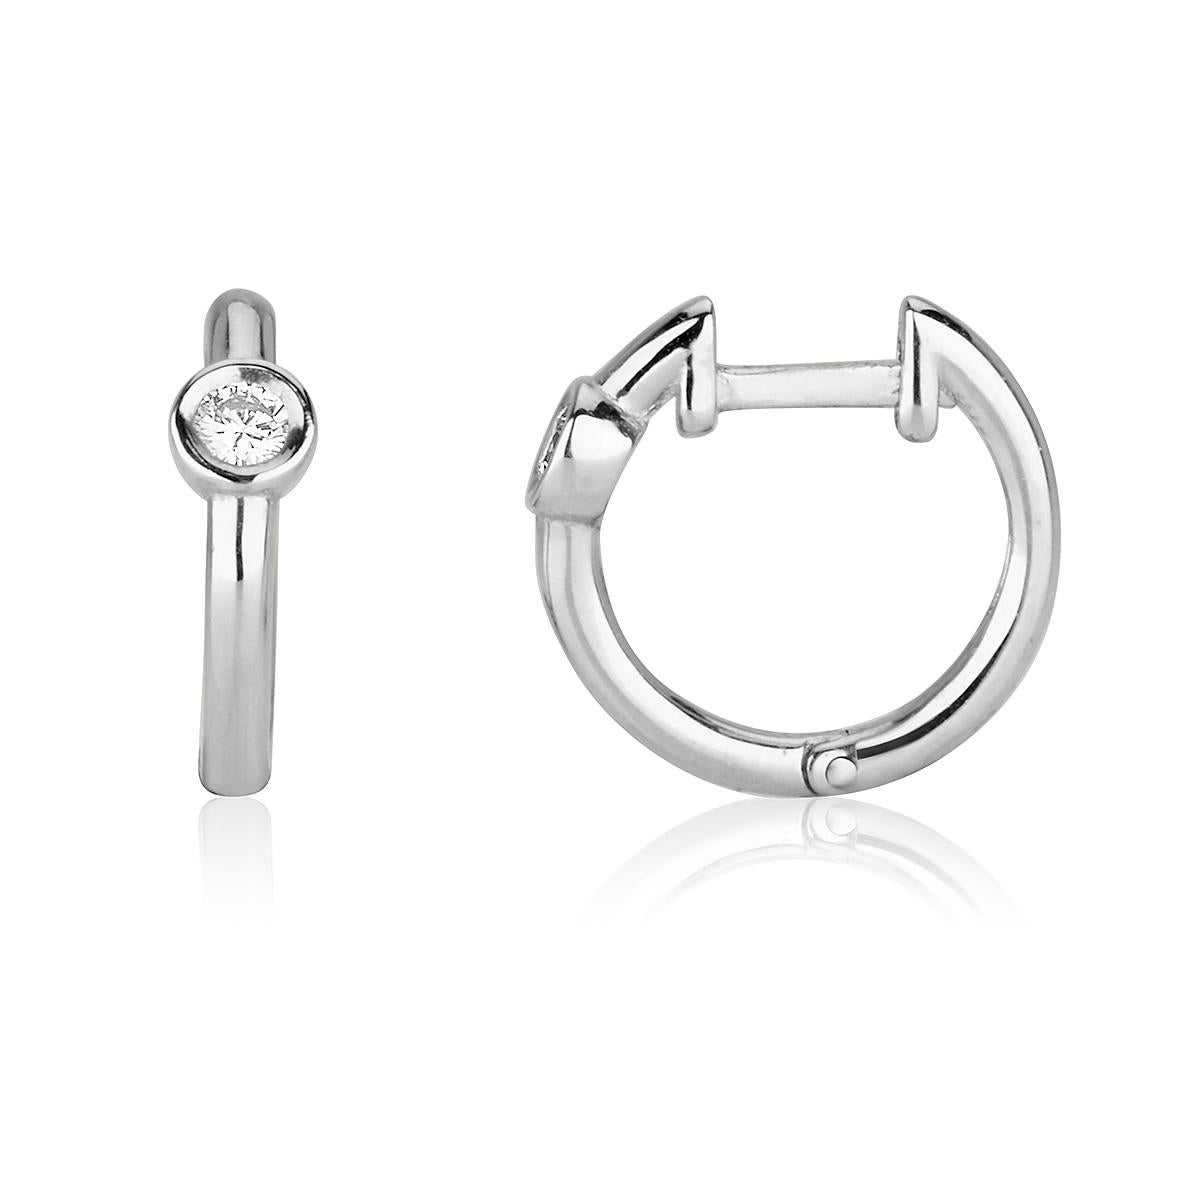 0.10 Carat Diamond Huggie Hoop Earrings in 14K White Gold - Shlomit Rogel

A staple in every woman's jewelry collection - classic diamond hoop earrings. Handcrafted from 14k white gold and bezel set with a genuine 0.05 carat diamond, these hoop